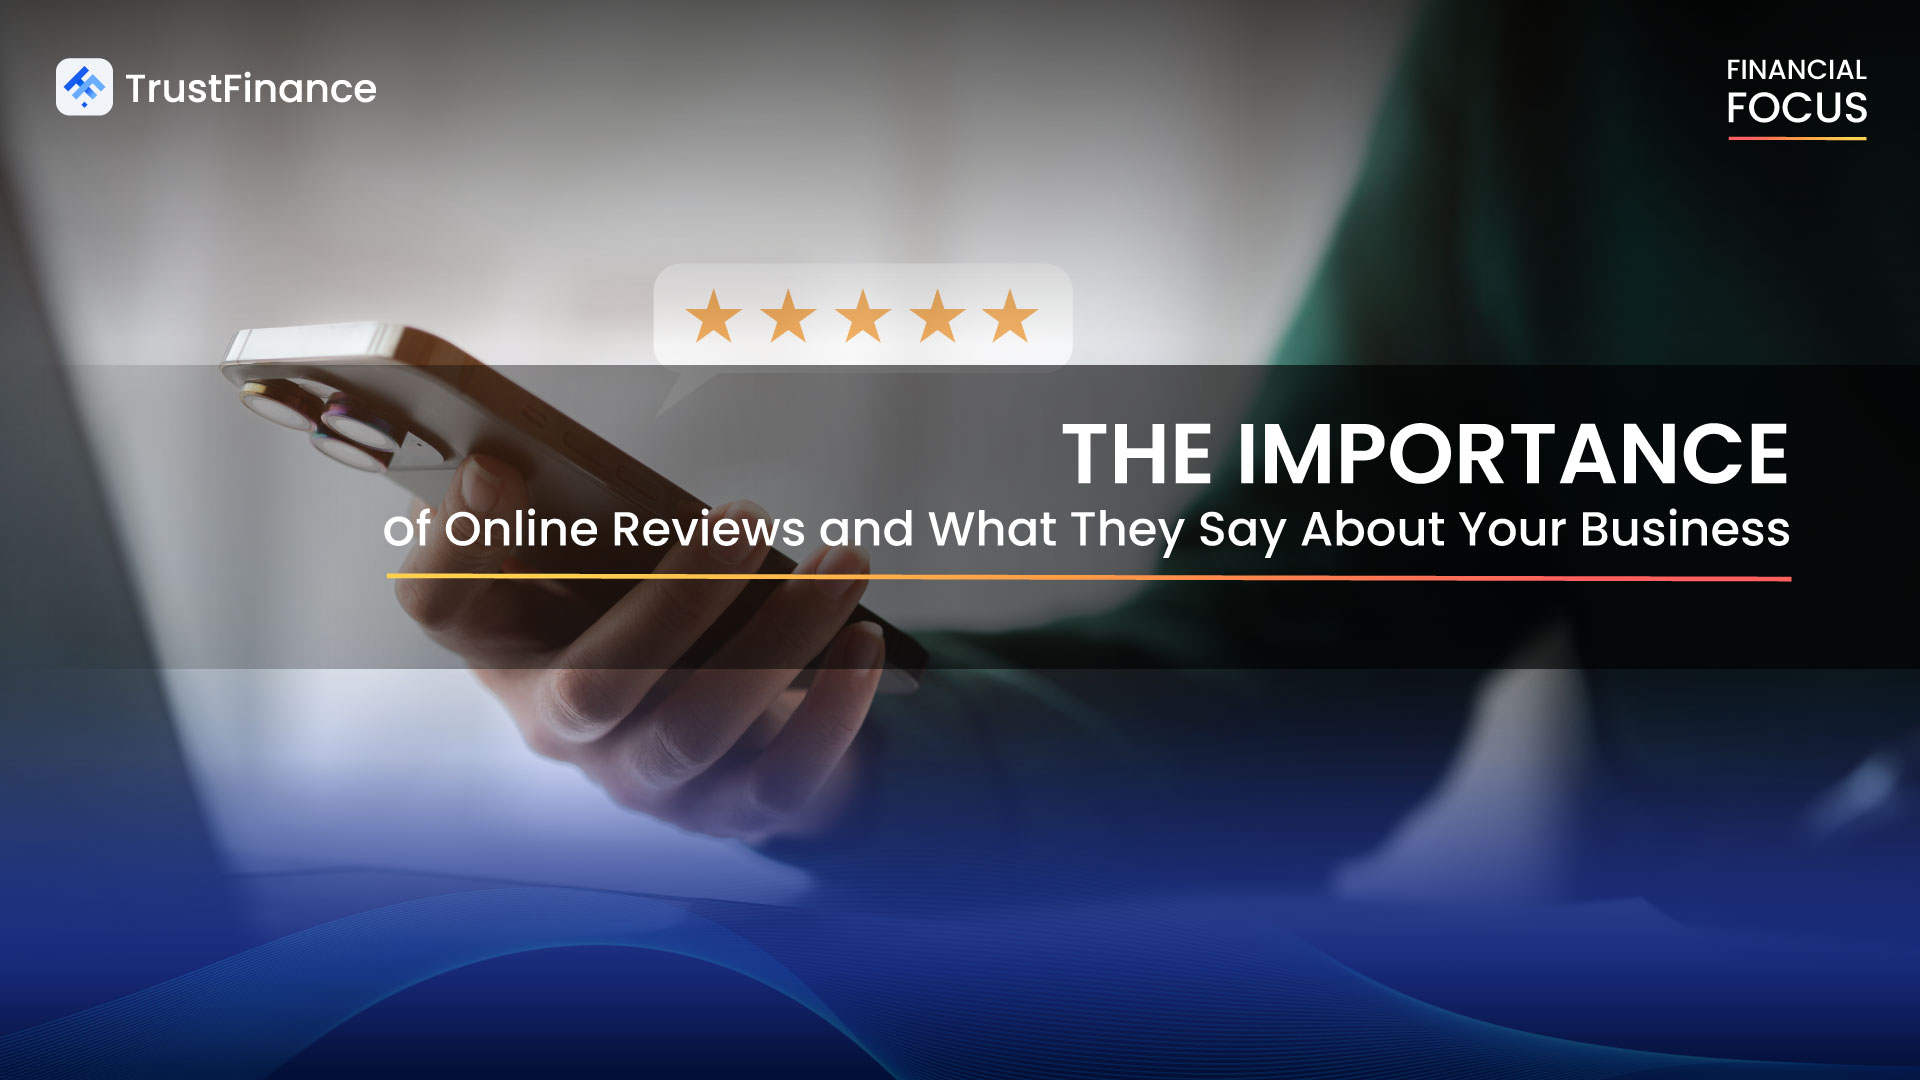 The Importance of Online Reviews and What They Say About Your Business